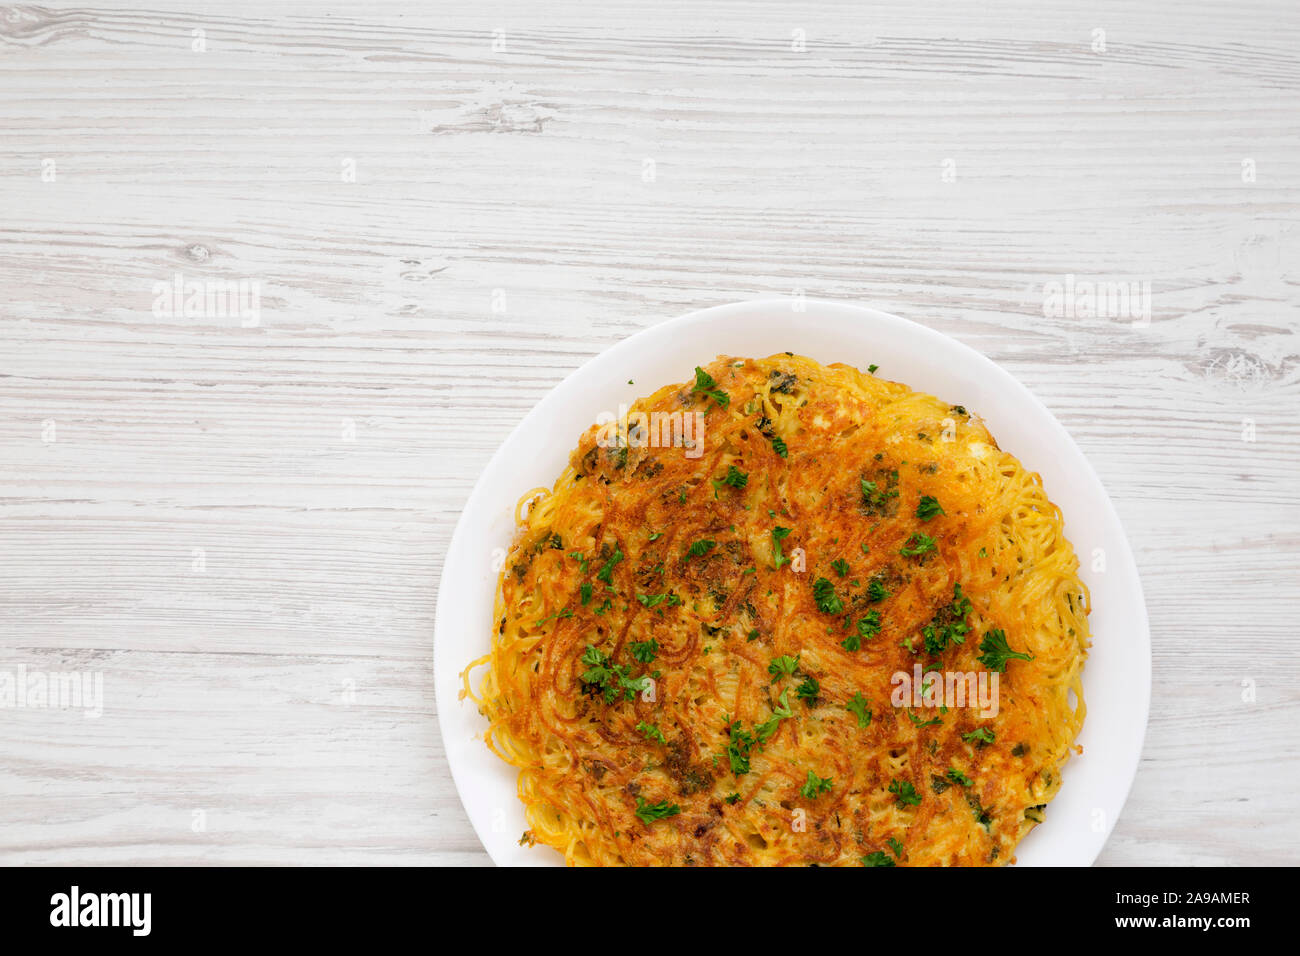 Homemade spaghetti omelette on a white plate over white wooden surface, view from above. Flat lay, overhead, from above. Copy space. Stock Photo